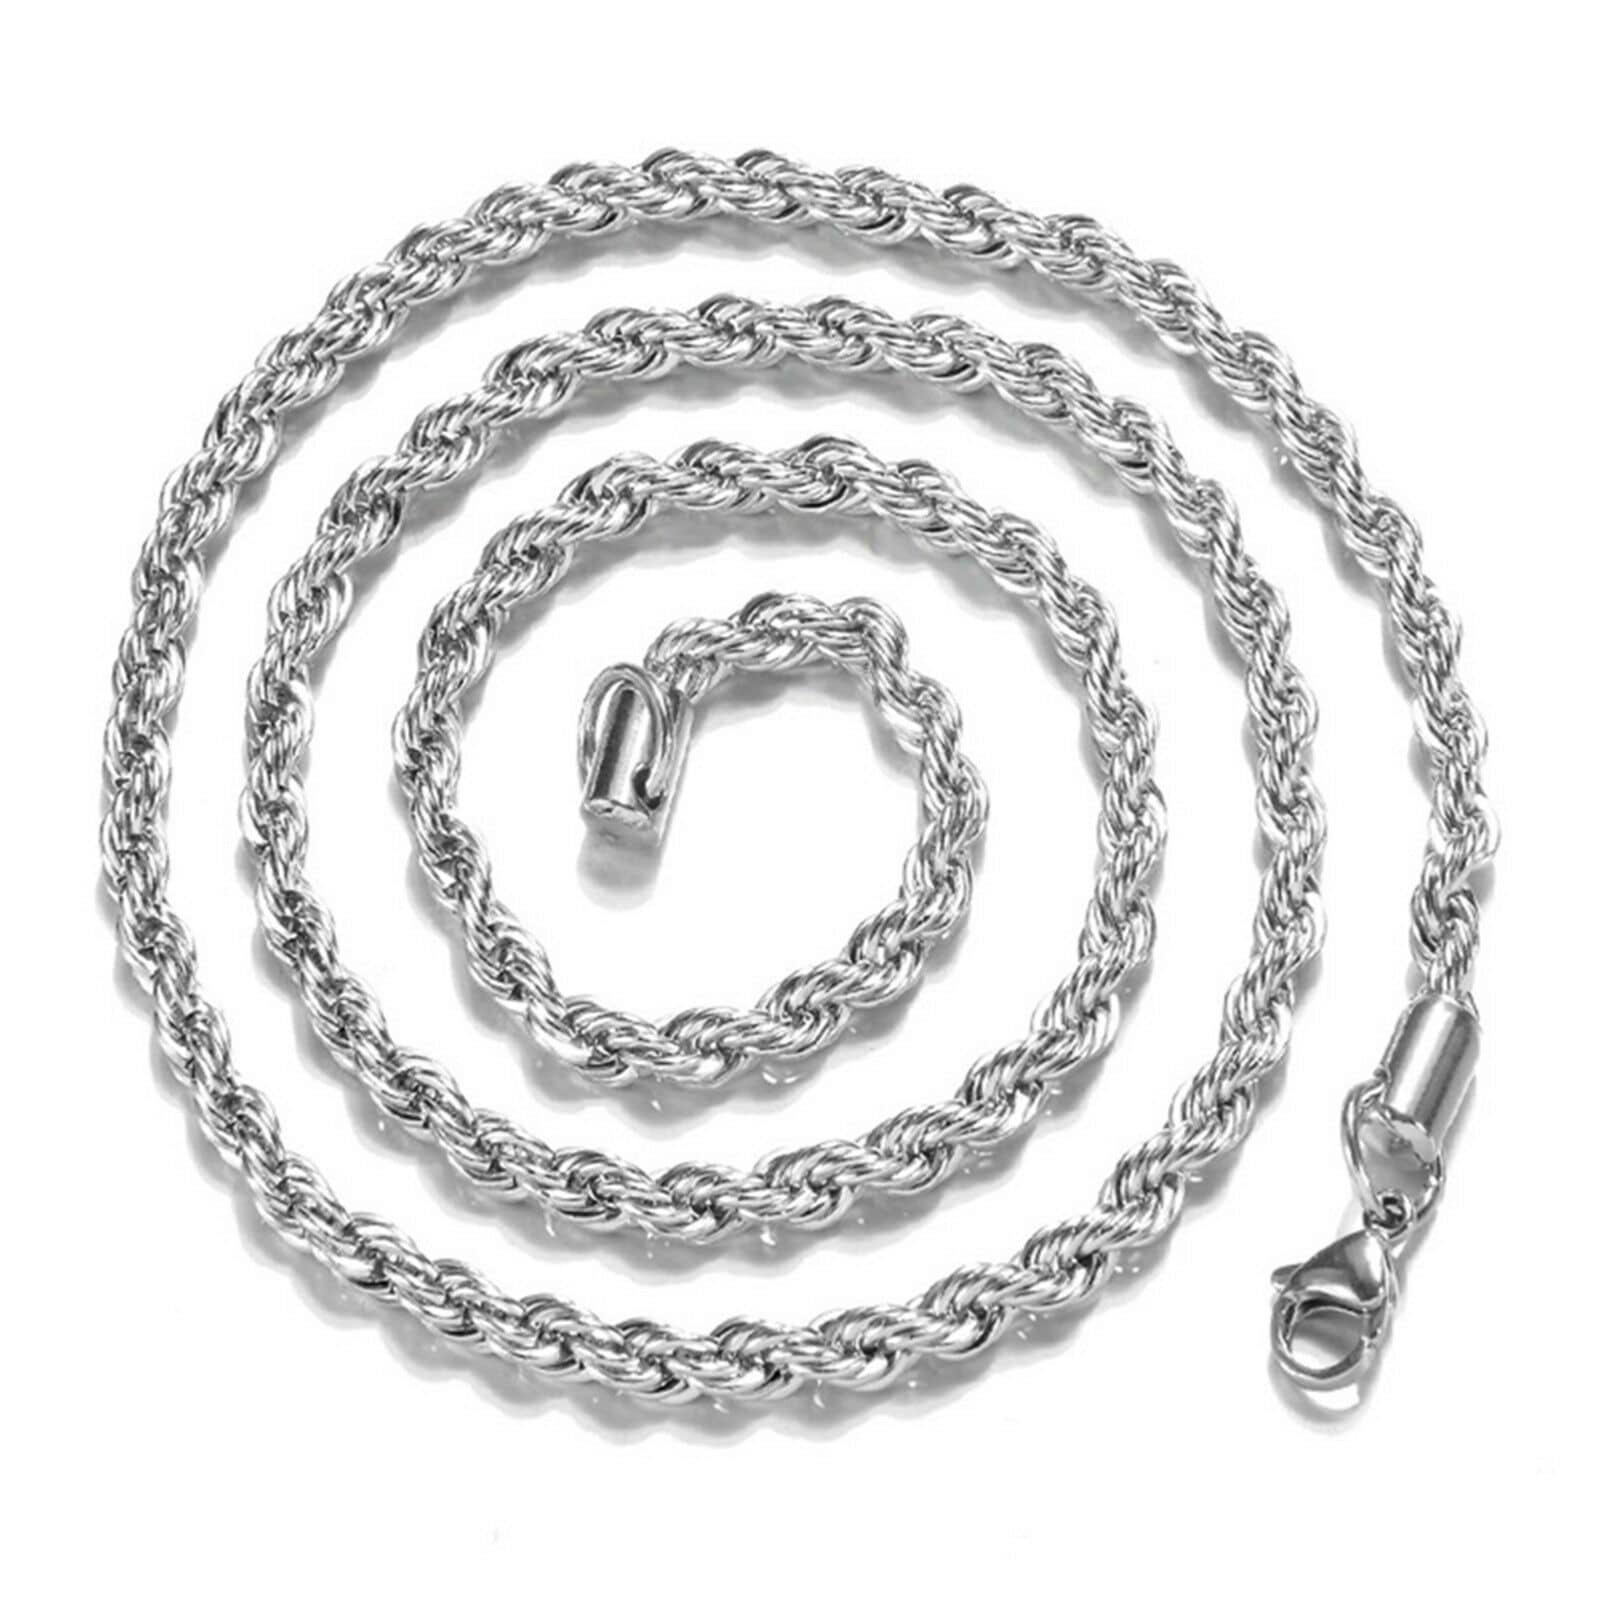 Men's Black Stainless Steel 3 mm Rope Chain Necklace